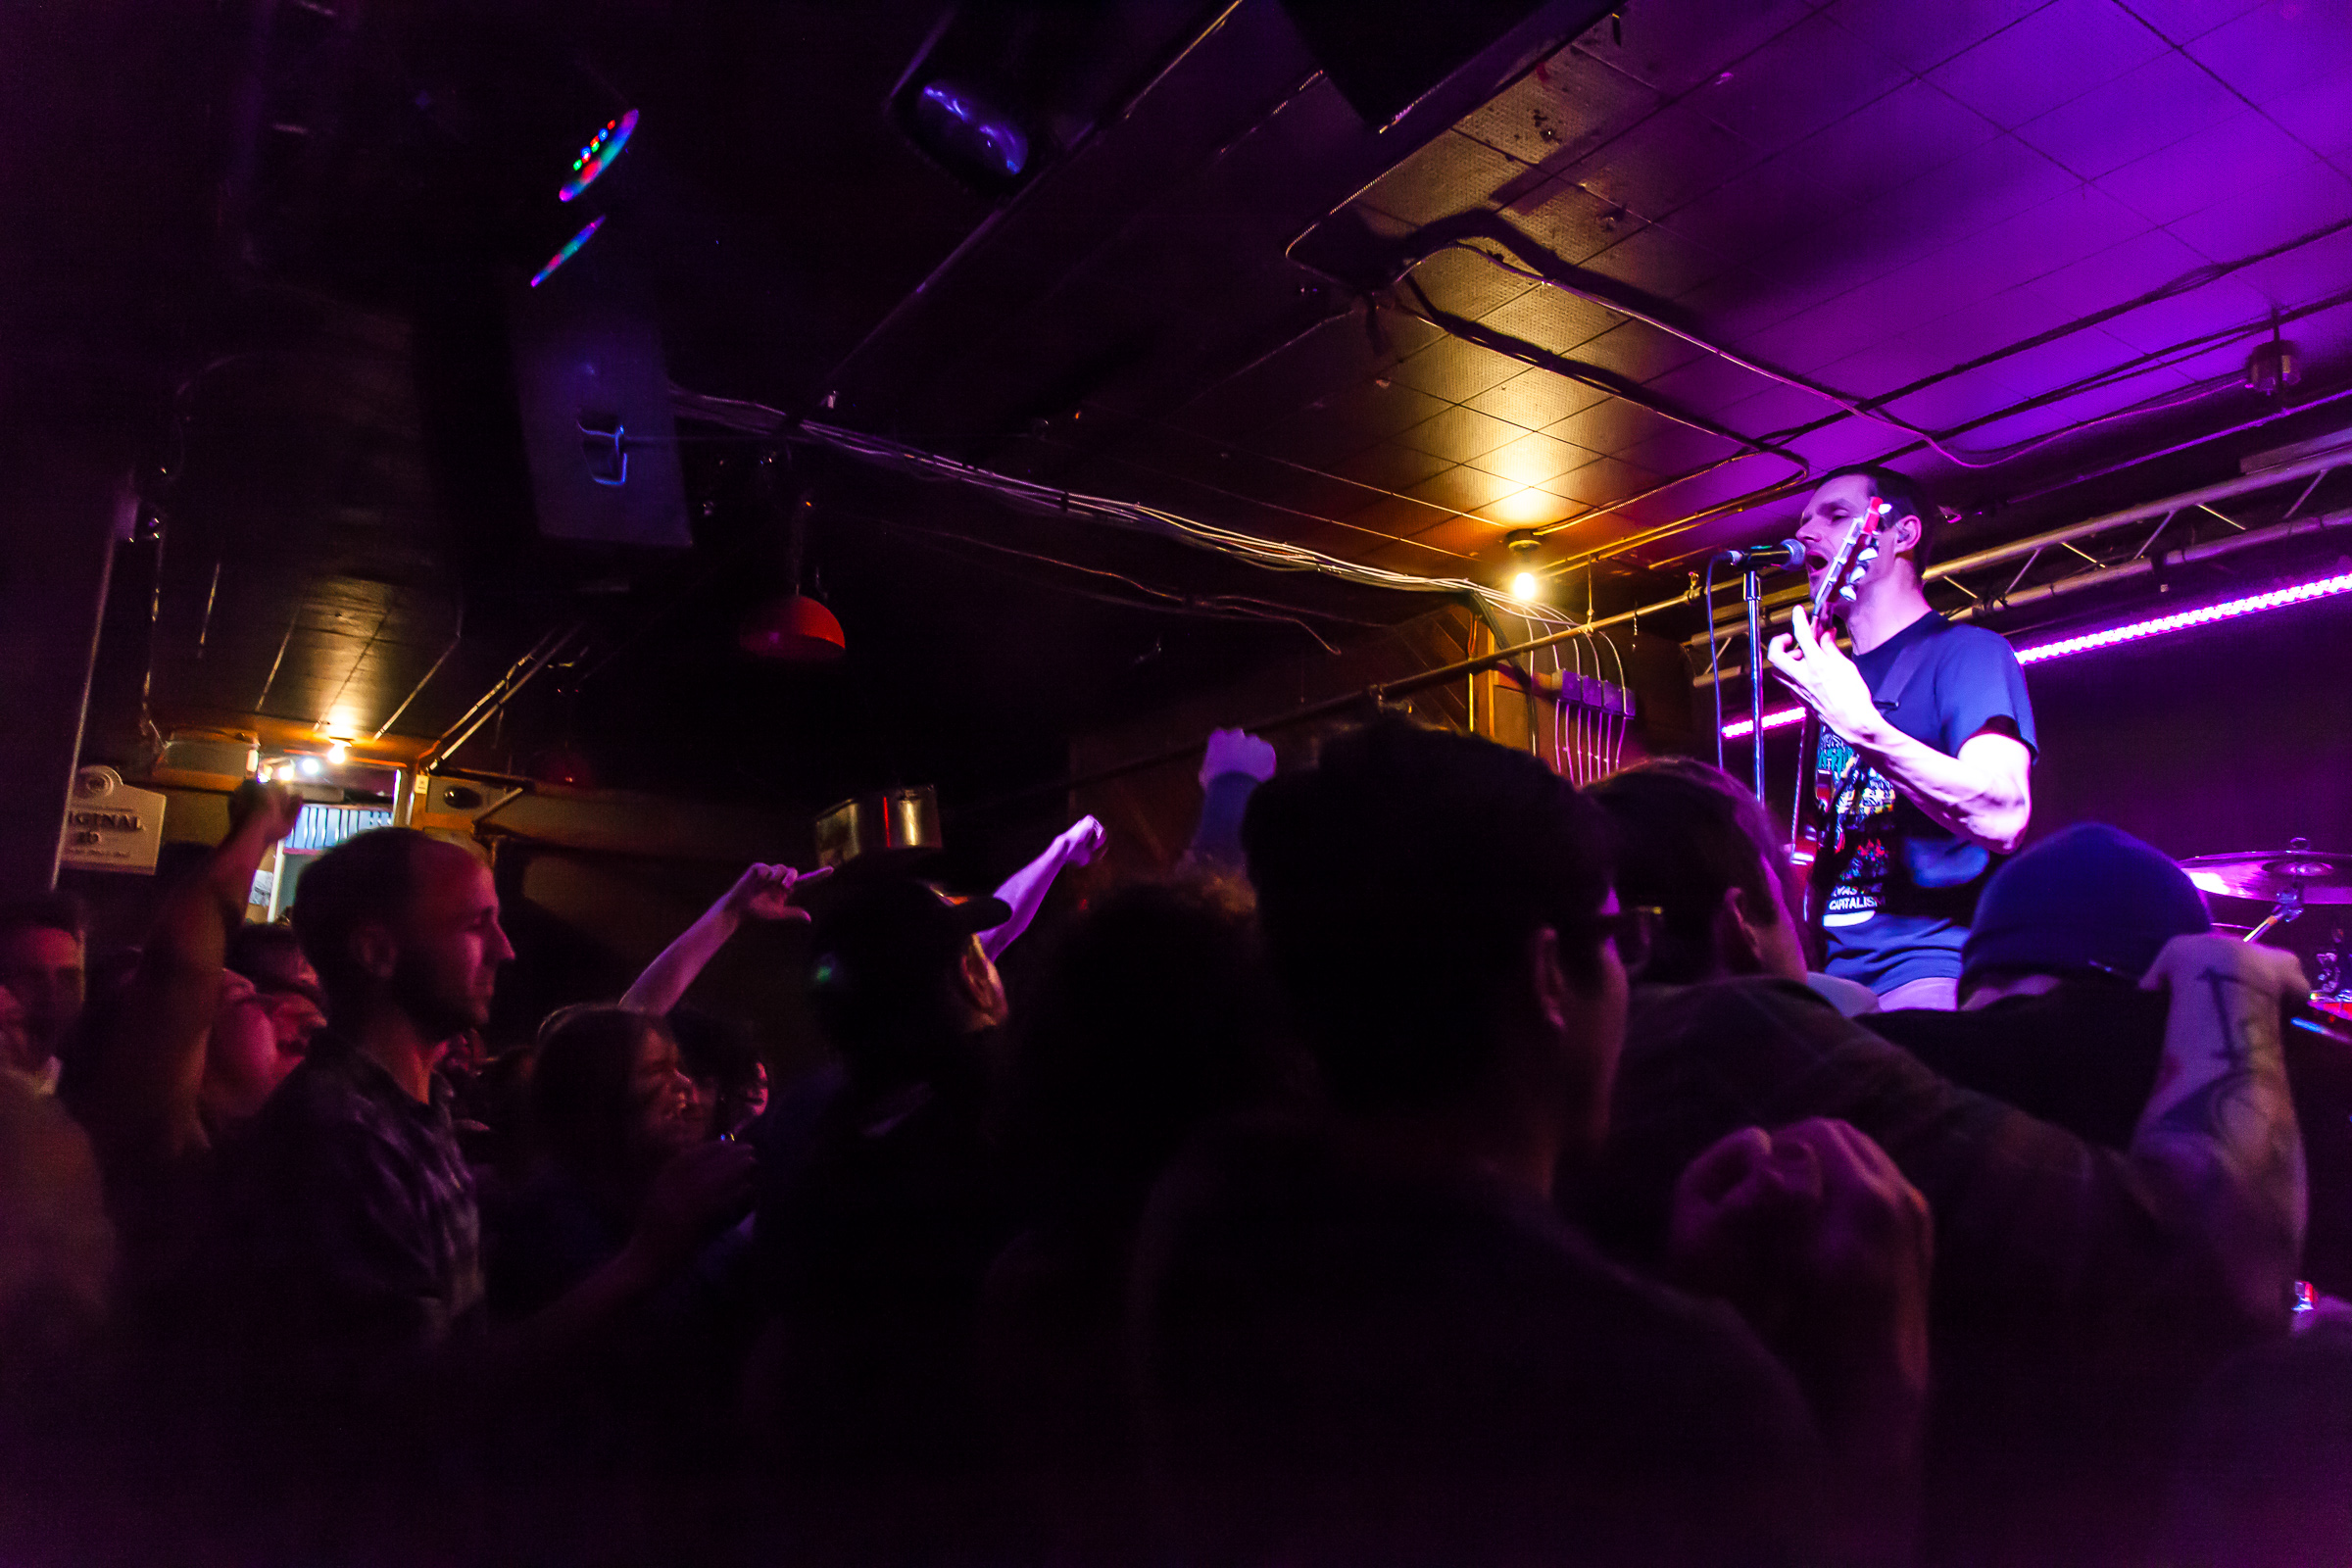 Propagandhi and the crowd at the Windsor